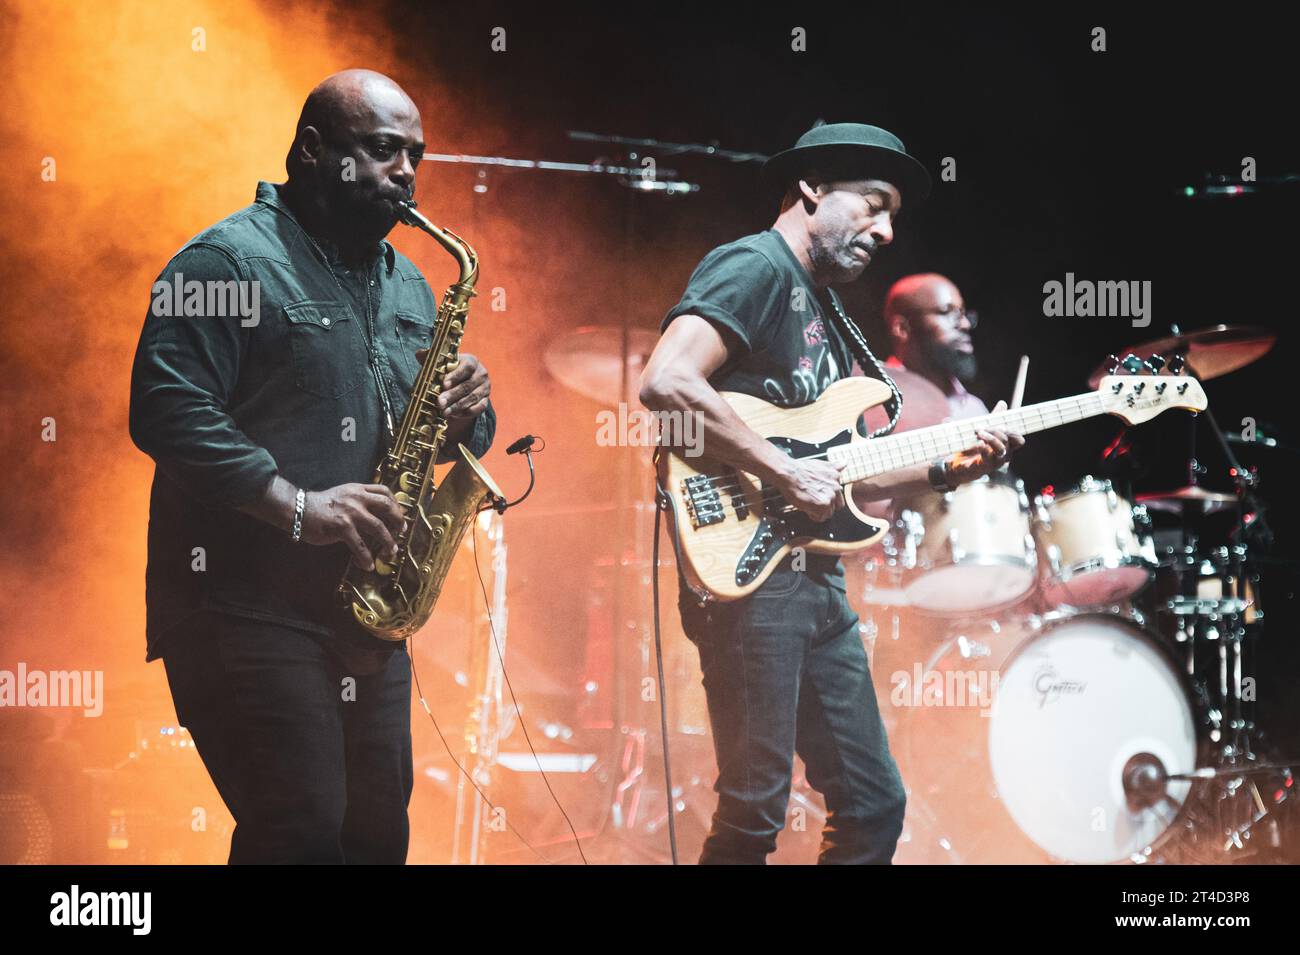 ITALY, TURIN, OCTOBER 29TH: The saxophonist Donald Hayes (L) performing live on stage in Turin, during the American jazz/fusion bassist Marcus Miller (R) European tour 2023. Stock Photo